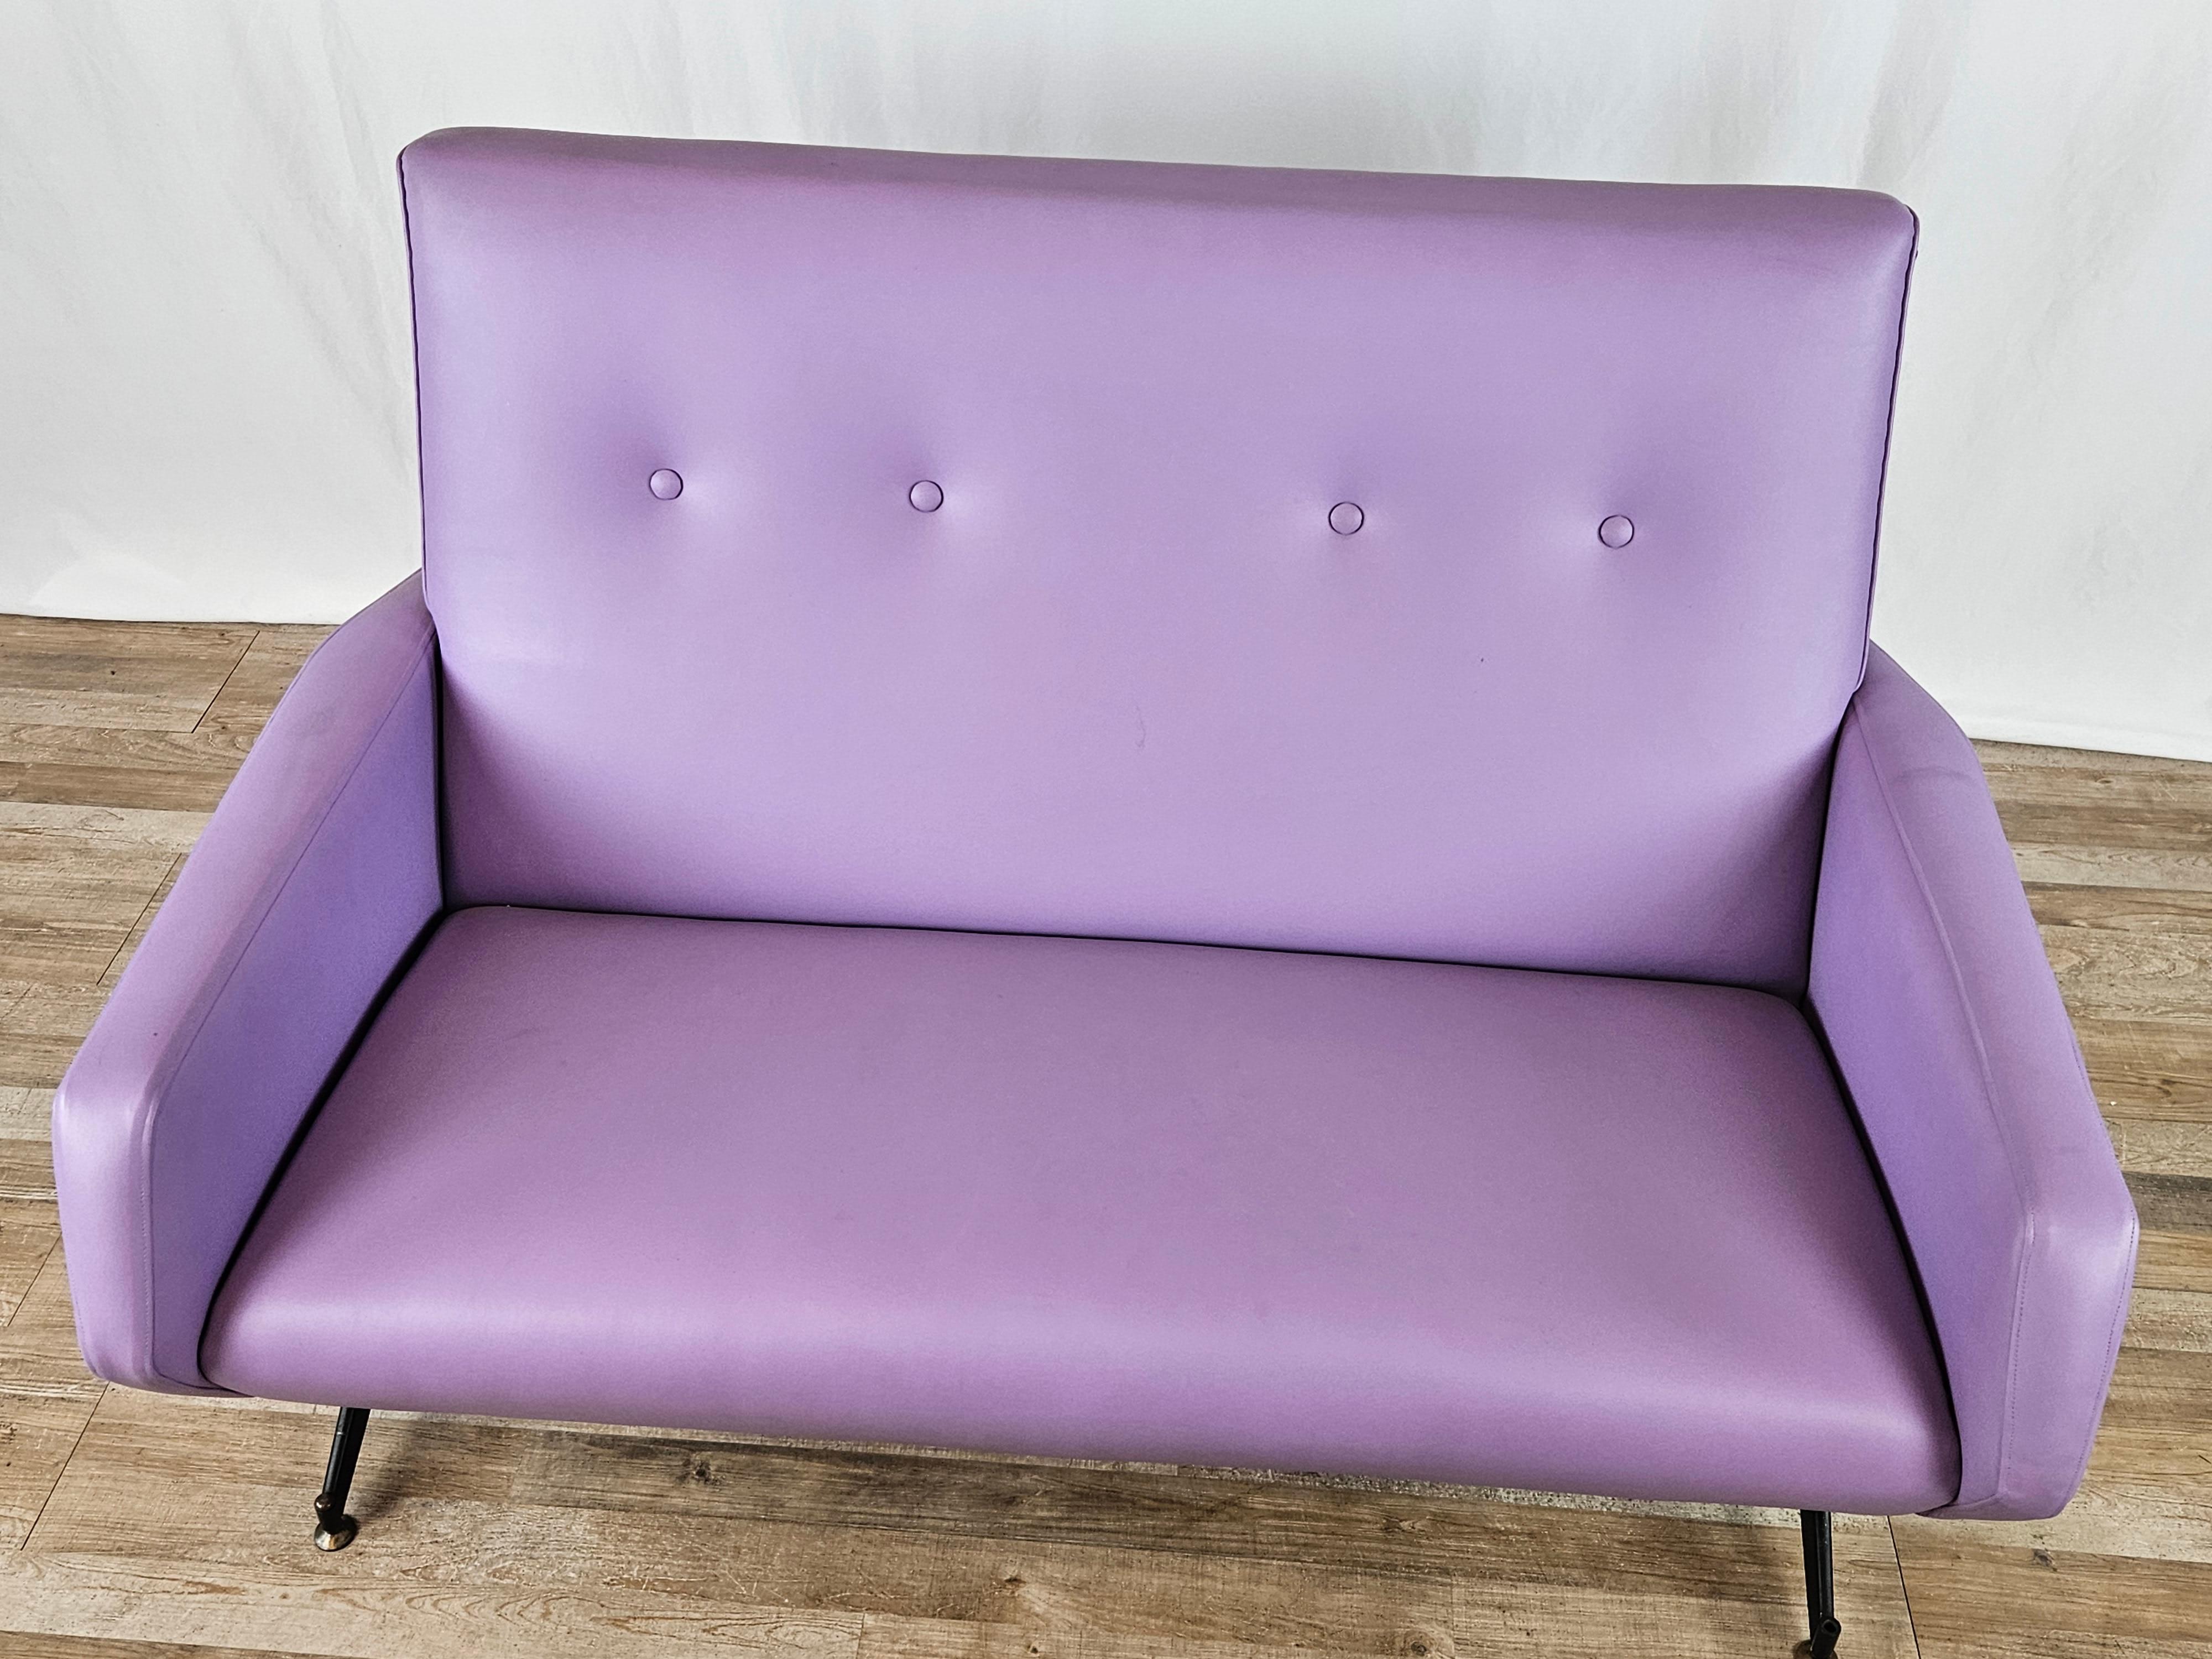 Modern two-seater sofa made of lilac-colored skai (leatherette) and iron frame with height-adjustable feet.

Vibrant and modern color, adaptable anywhere.

Despite its age it has been kept in very good condition, has two small holes at the sides as